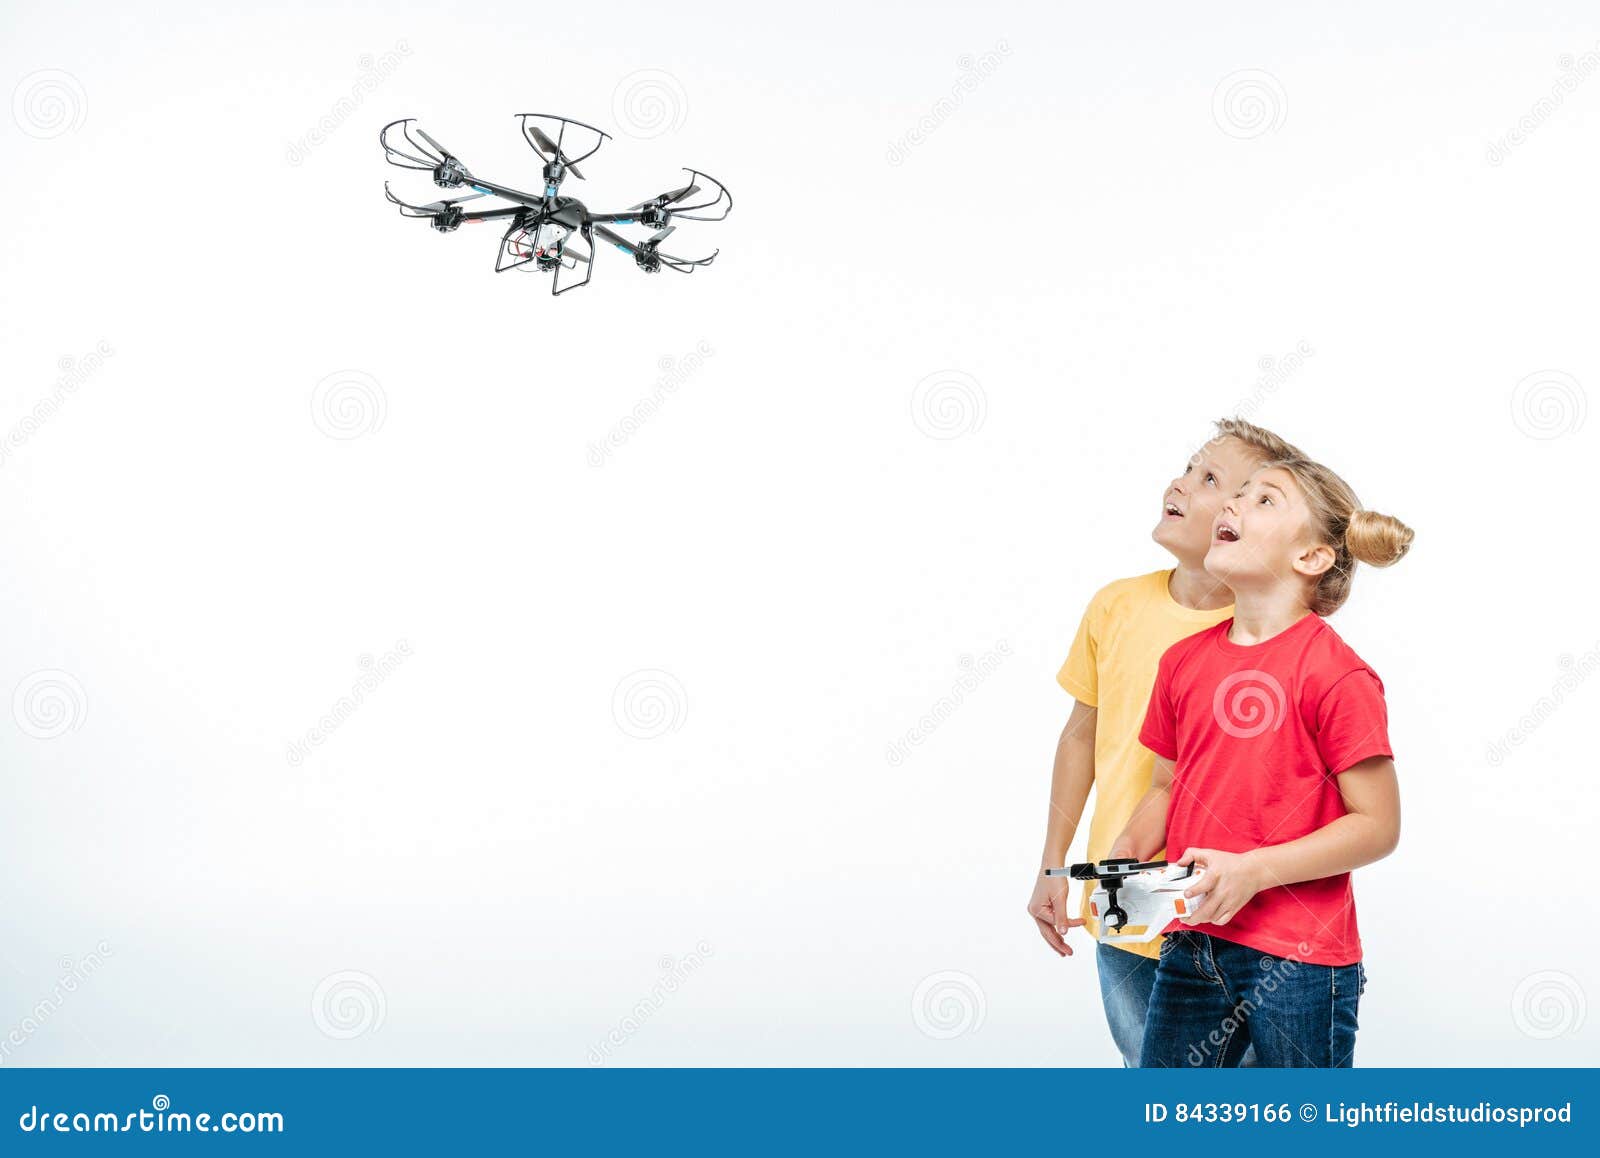 kids playing with hexacopter drone